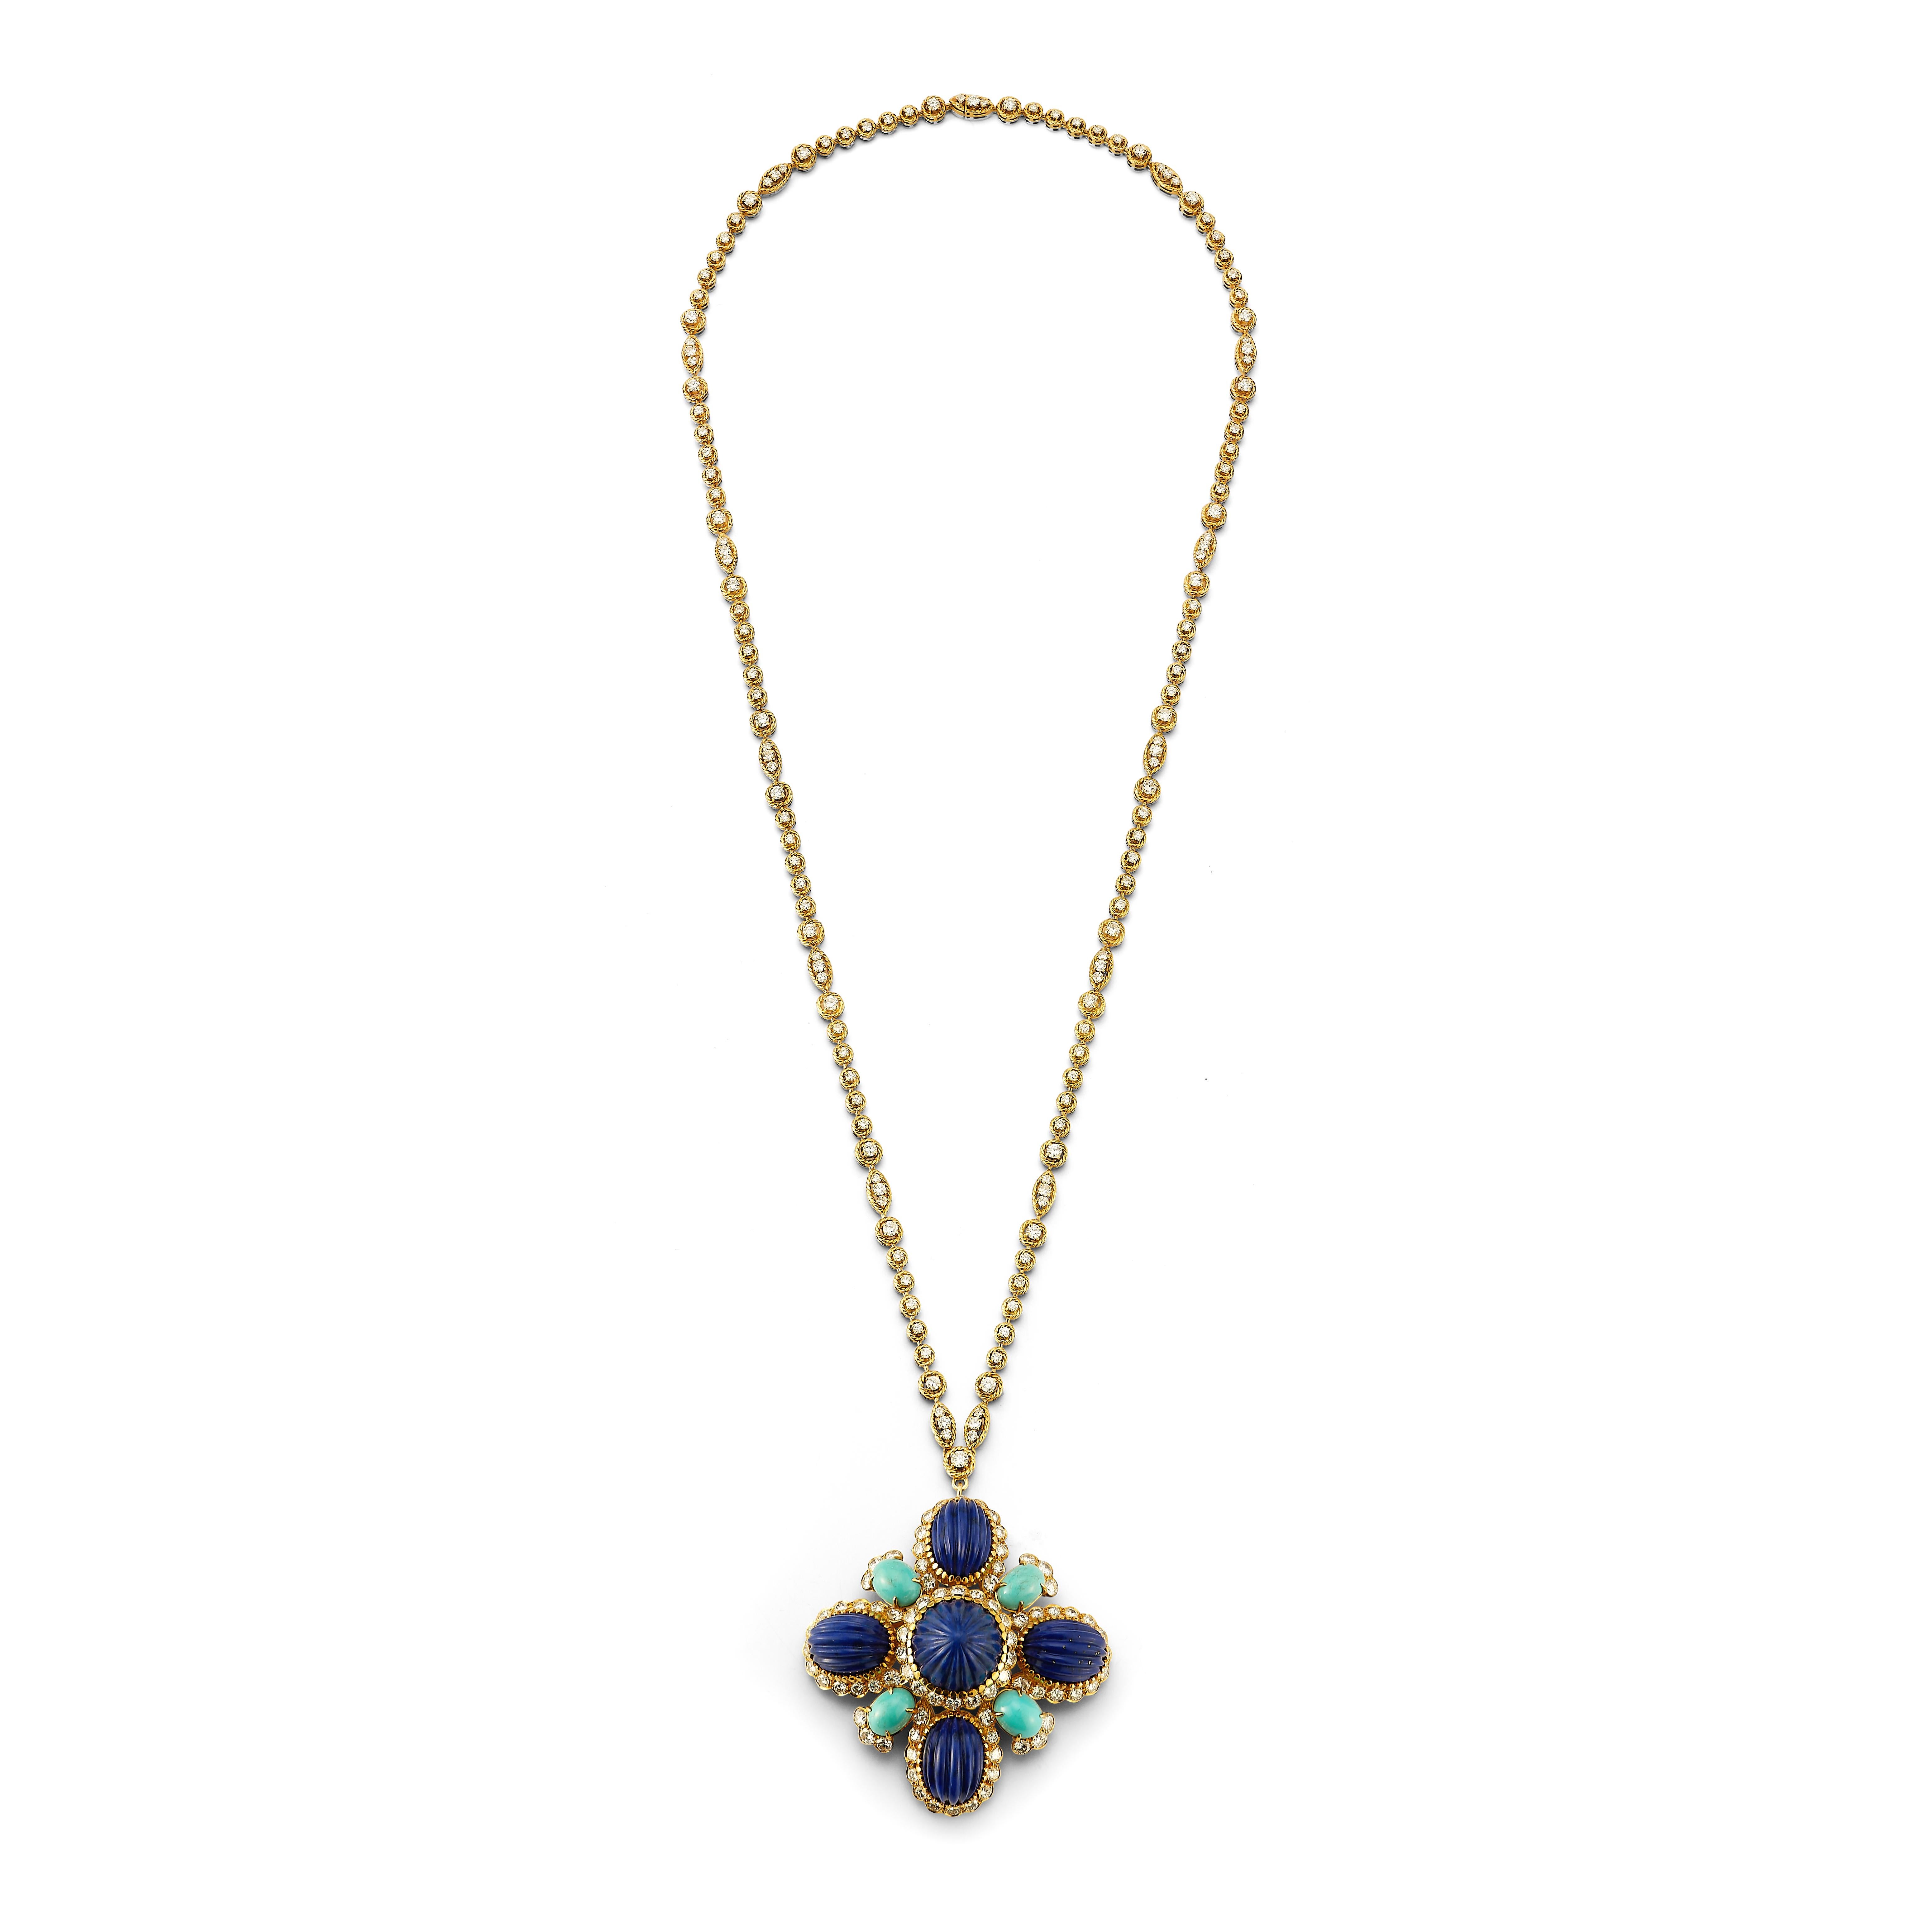 Van Cleef & Arpels Multi Gem Sautoir Pendant Necklace

An 18 karat gold chain necklace set with 141 round cut diamonds with a removable pendant  set with carved lapis lazuli, turquoise and diamonds

Pendant is removable and can be worn as a